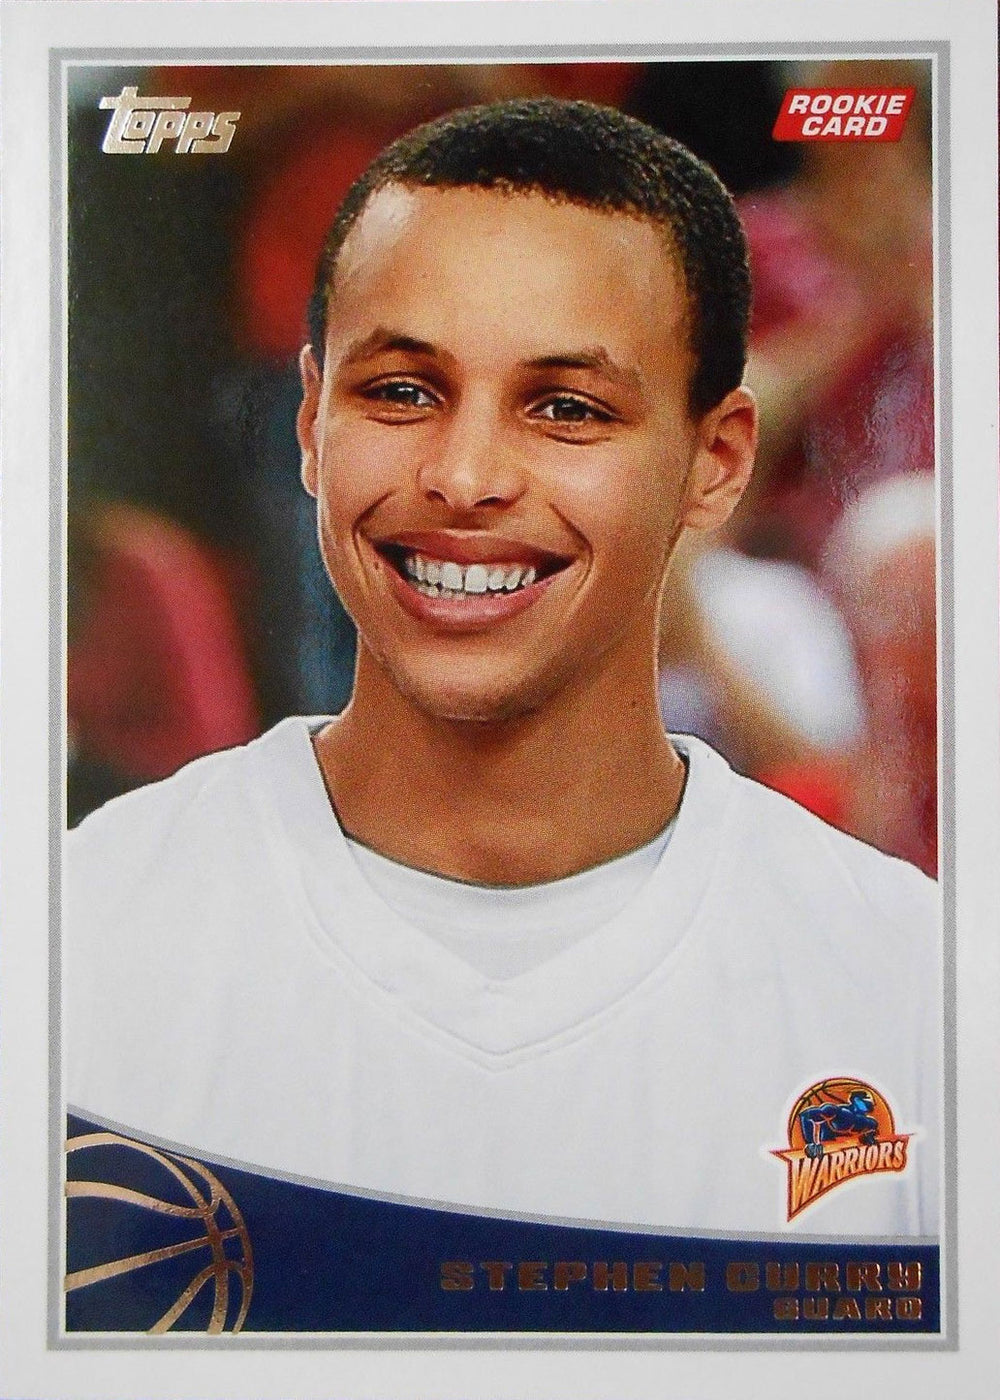 2009 2010 Topps Basketball Set Loaded with Stars and Rookies including Stephen Curry and James Harden Plus